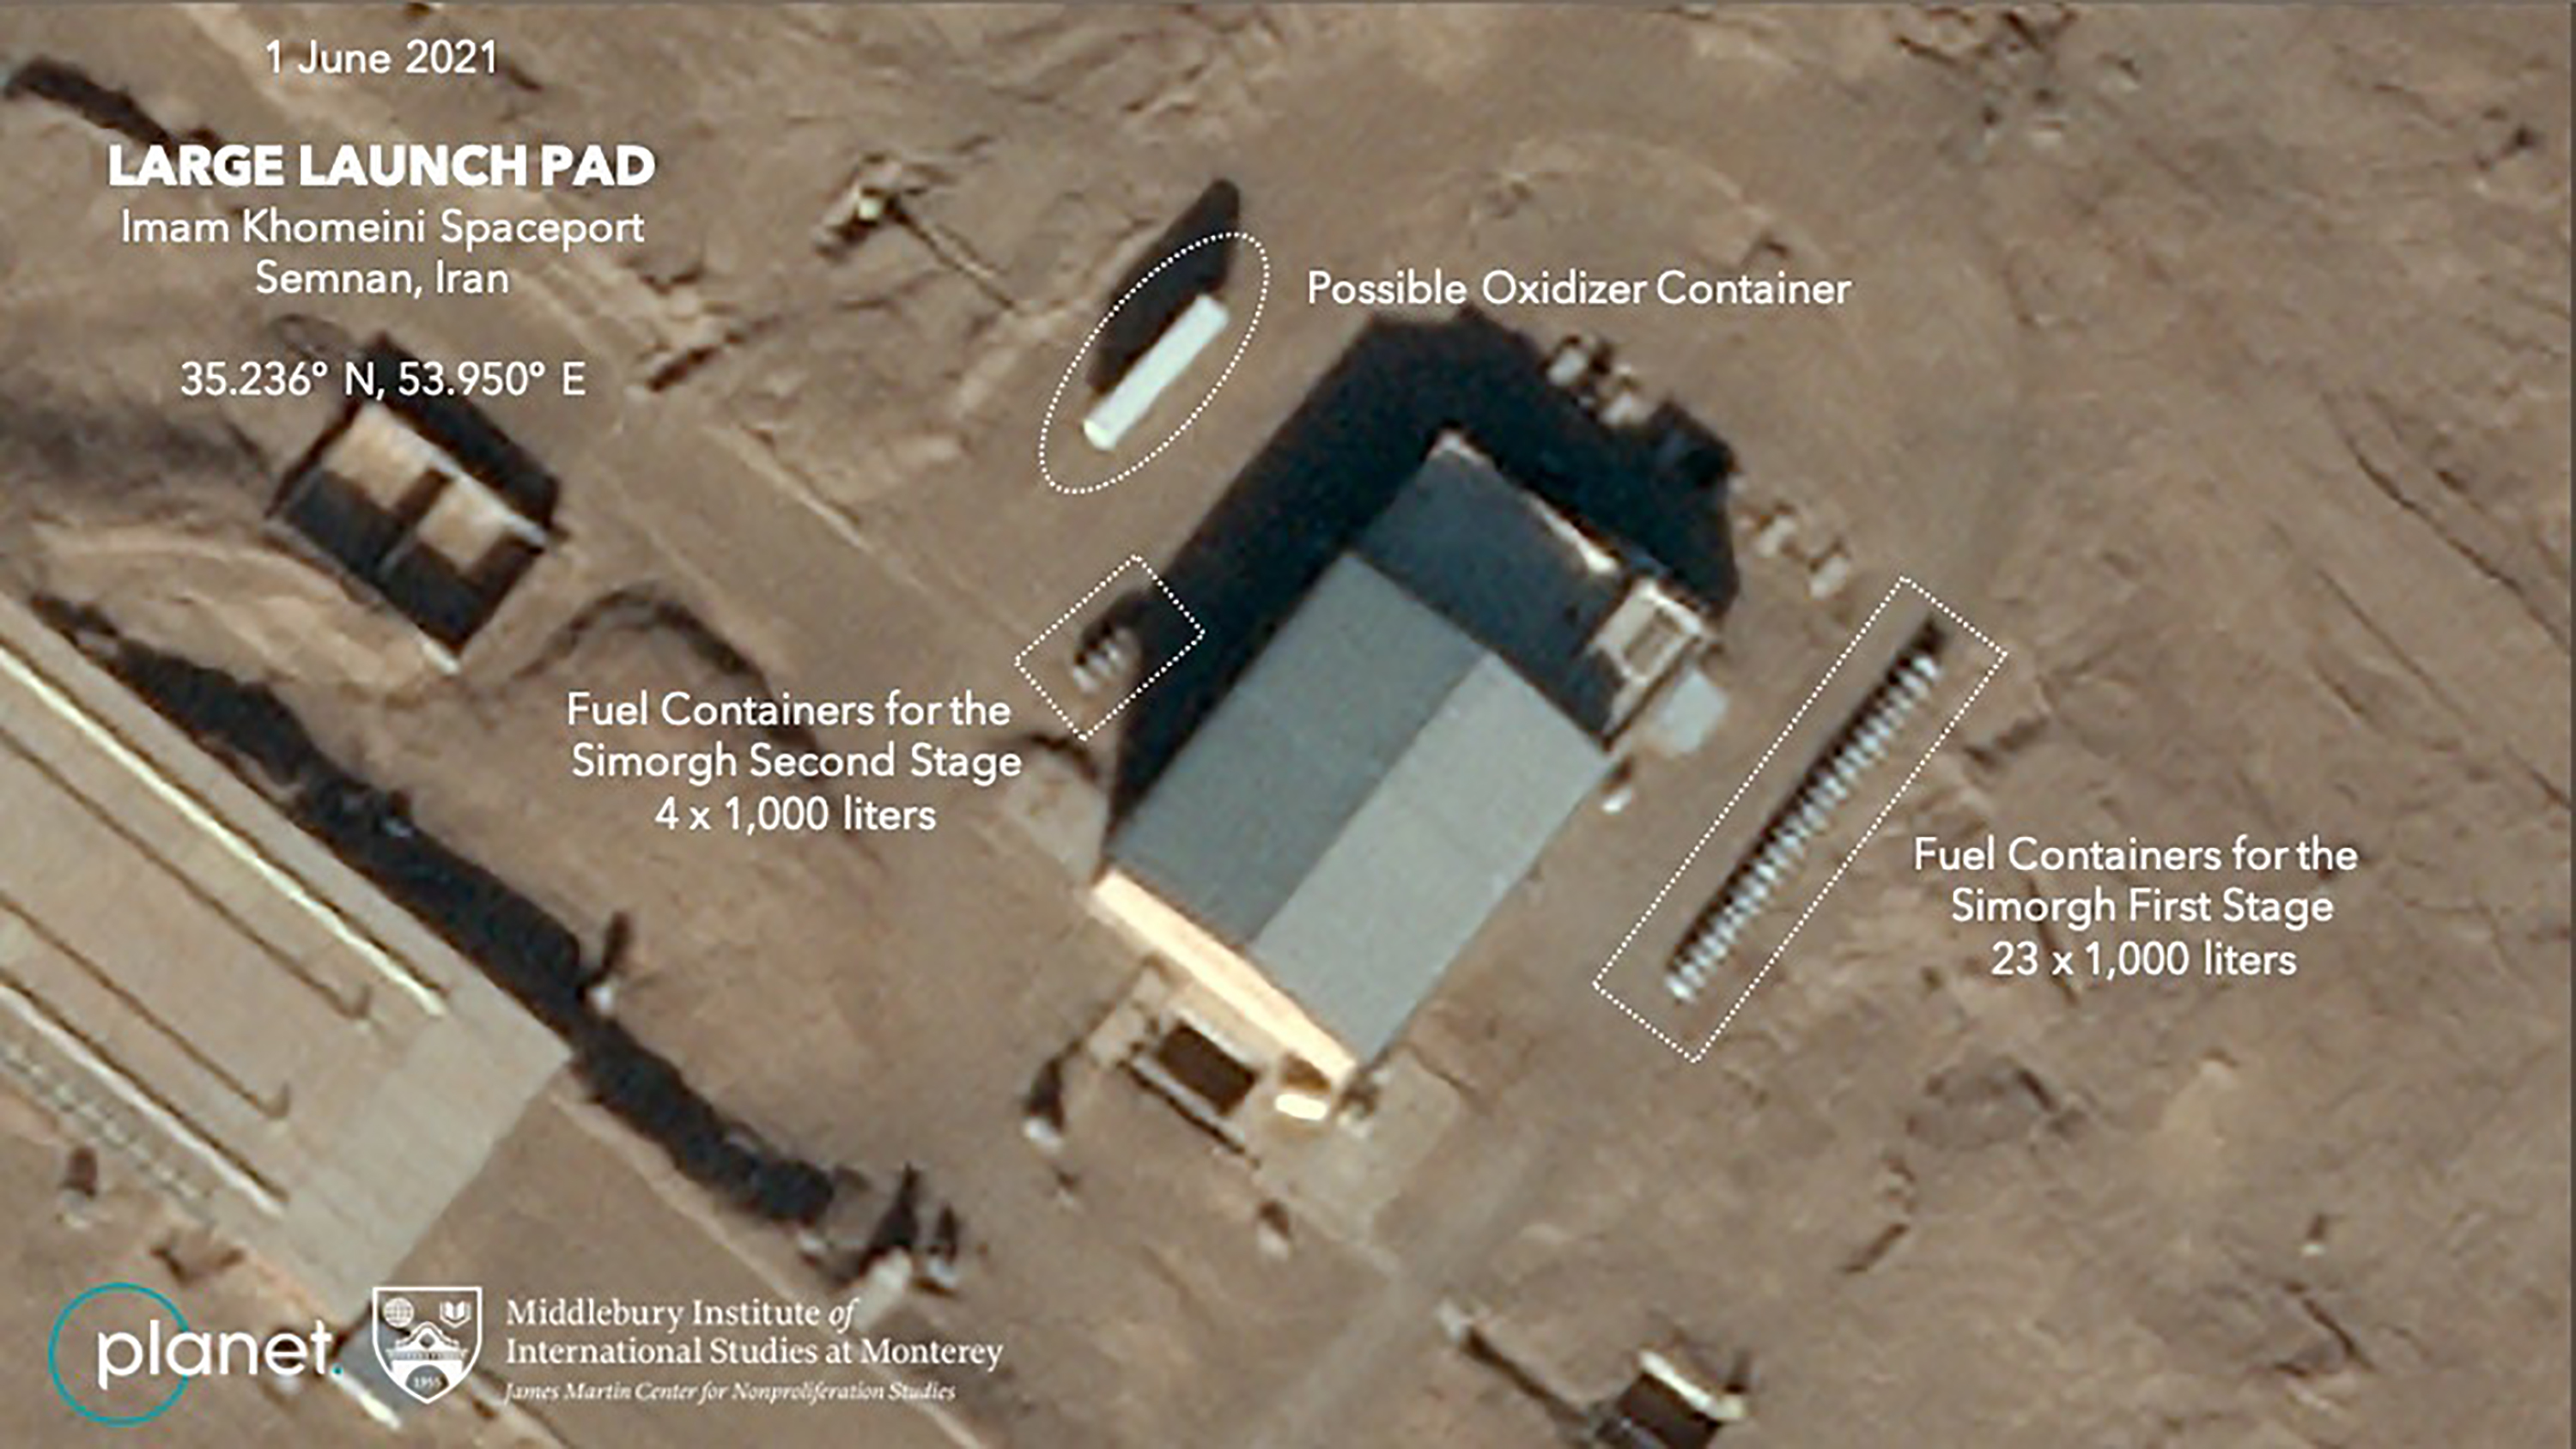 A satellite image showing preparations at the Imam Khomeini Spaceport 